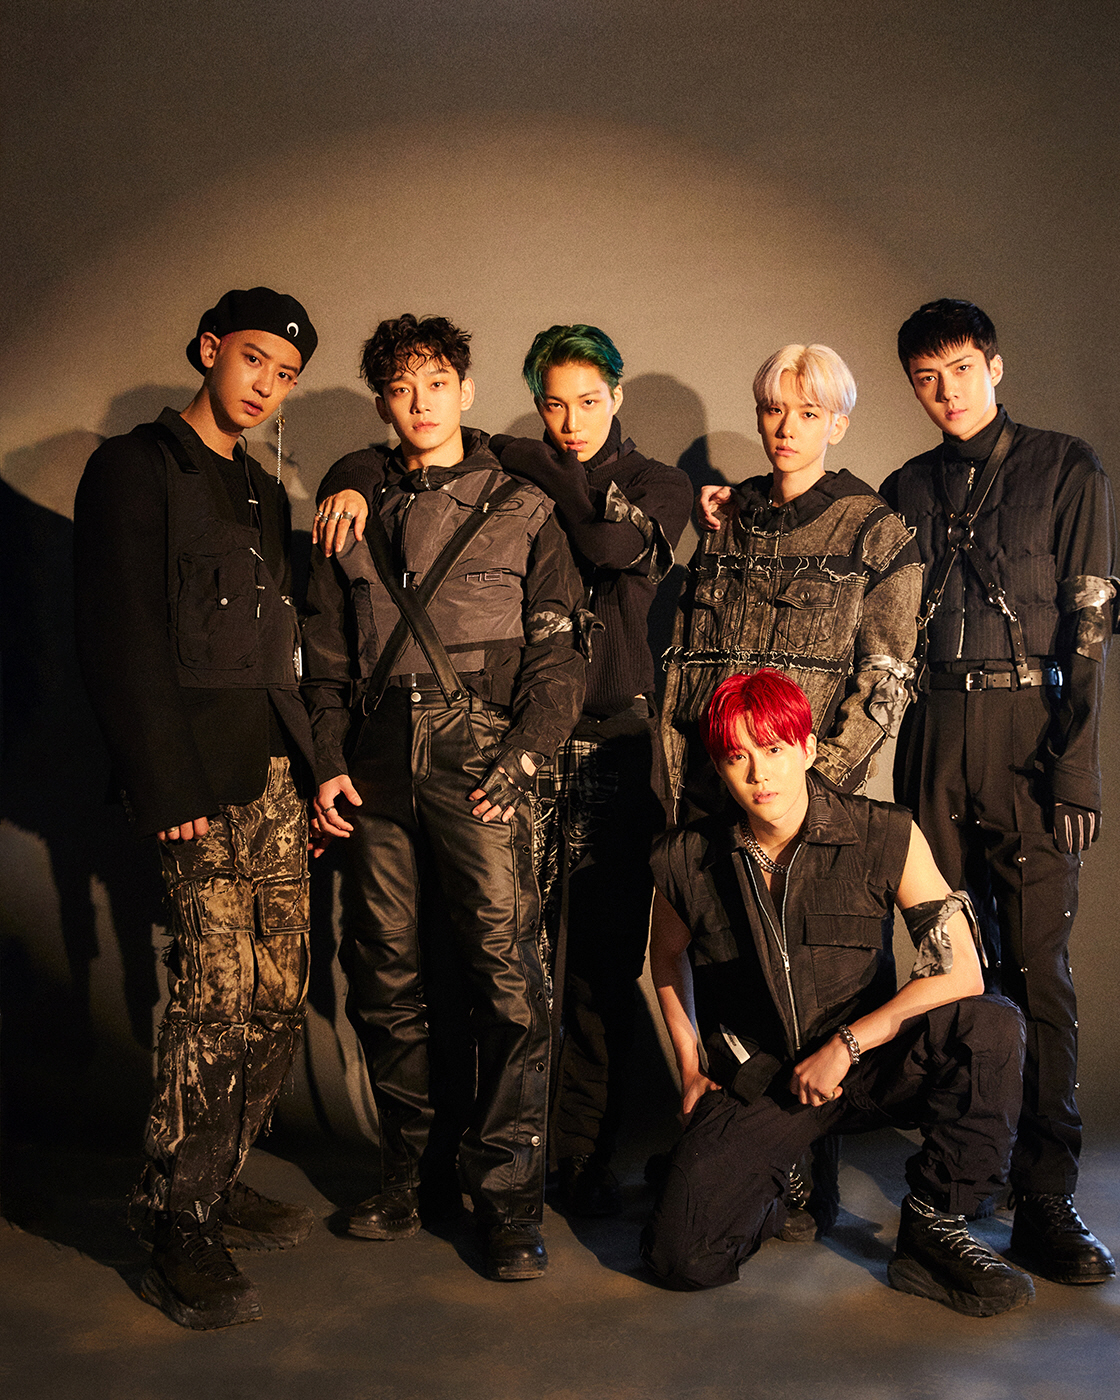 EXO (EXO) is performing a popular March with its Regular 6th album OBSESSION (Option).The sixth album of EXO Regular, released on November 27, topped the charts for two consecutive weeks, including Hanter charts and HotTrax, released today (9th).In addition, EXO is the title song Obsession of addictive hip-hop dance genre, KBS2TV Music Bank, MBC show!Music center and other music programs at the same time as comeback, the first place was recorded to realize the popularity.In addition, EXO will open a special azit EXO The Place (EXO THE PLACE) decorated with Regular 6th album contents at 74-54 Itaewon-dong, Yongsan-gu, Seoul from December 9th to 22nd, and it is expected to be a good response because it can meet various attractions such as costume, jacket photo and media art as well as Obsession music video set.